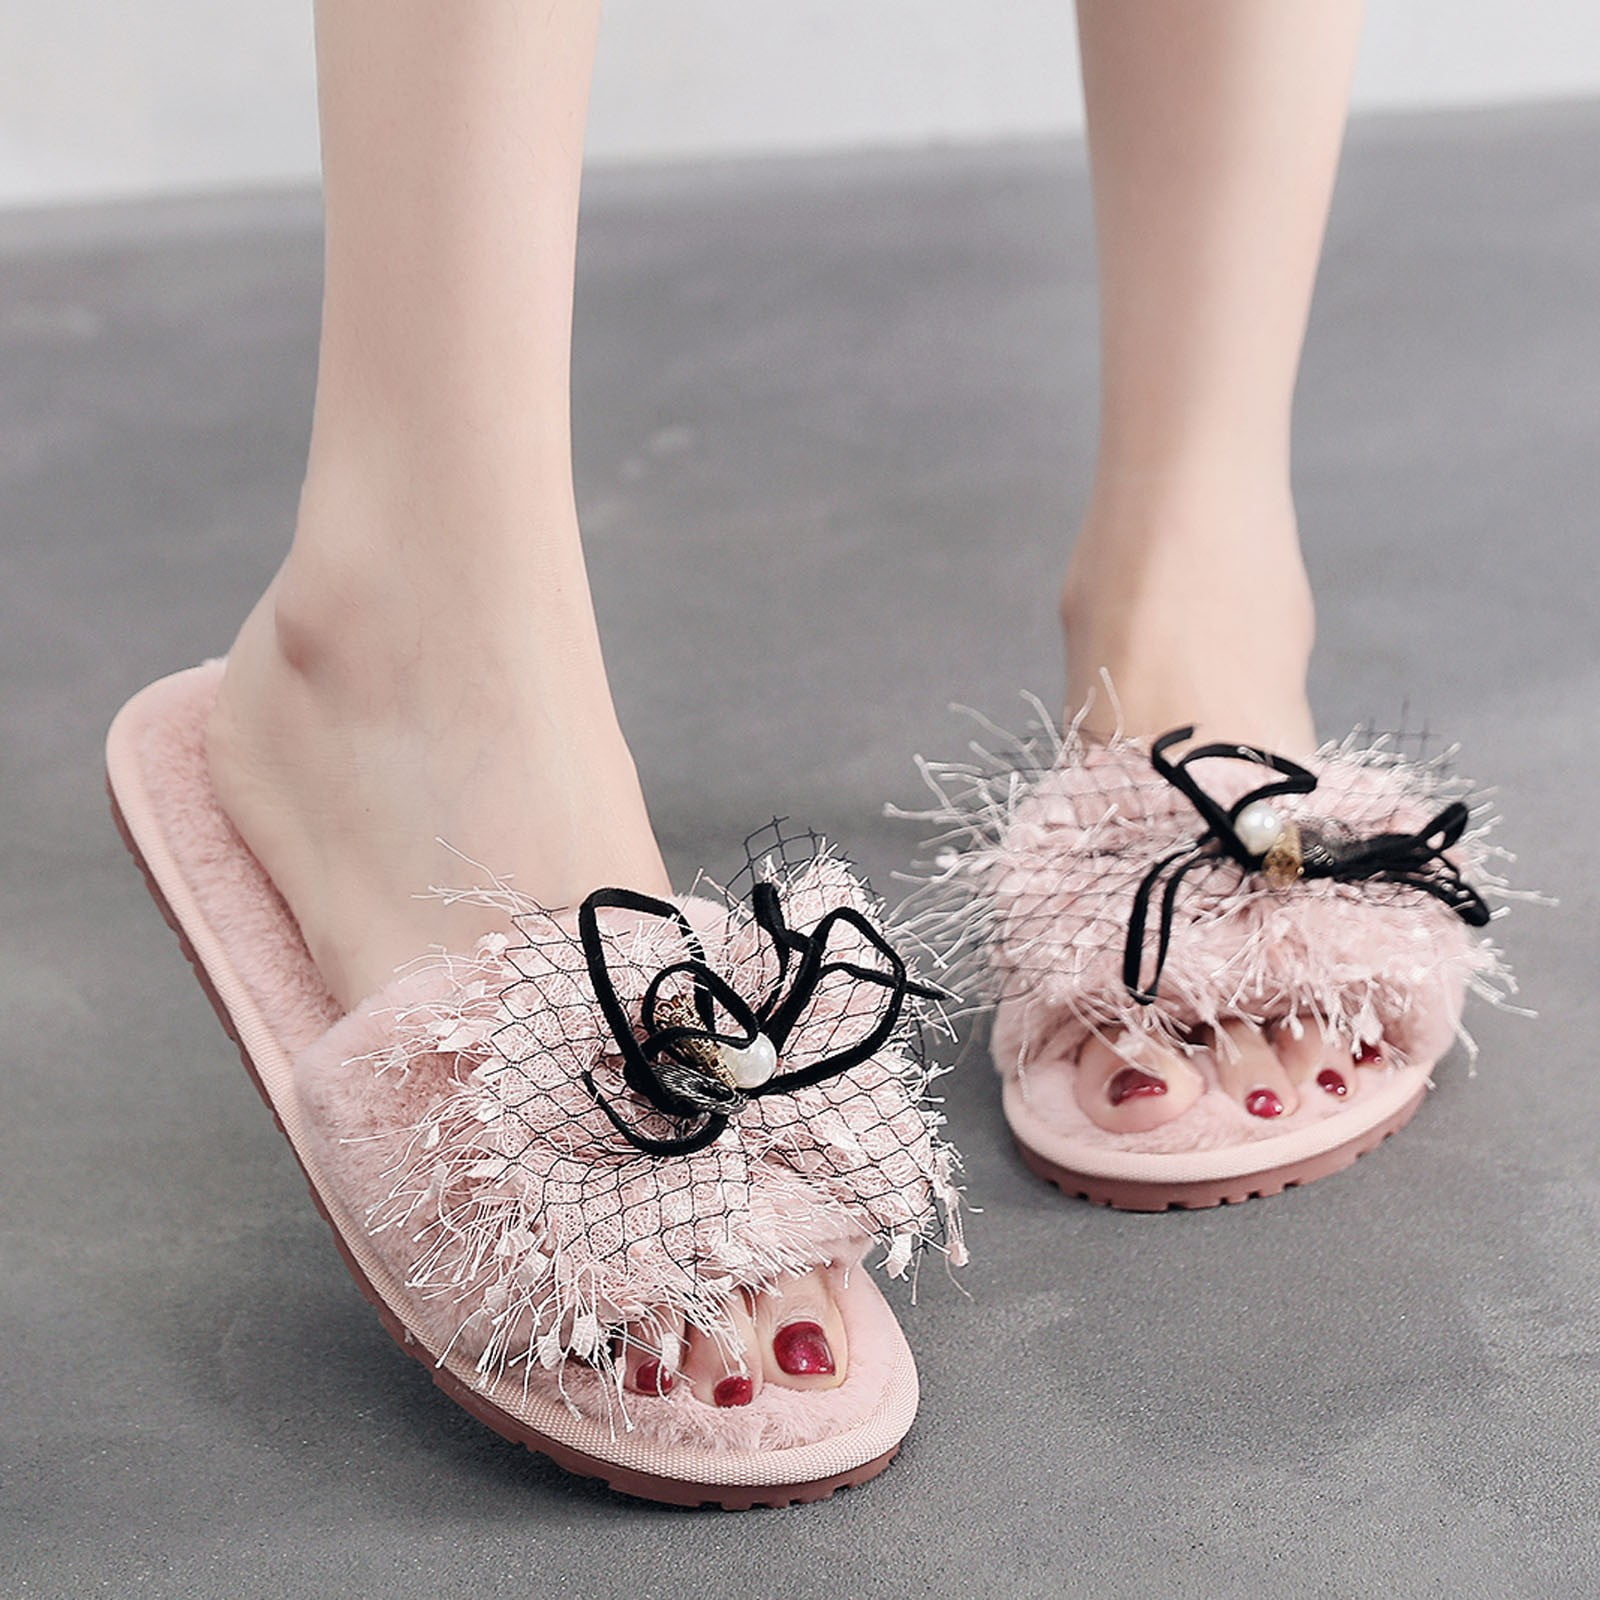 NEW WOMENS LADIES FURRY COMFY COSY HOUSE KITCHEN FLAT MULE WARM SLIPPERS SIZE UK